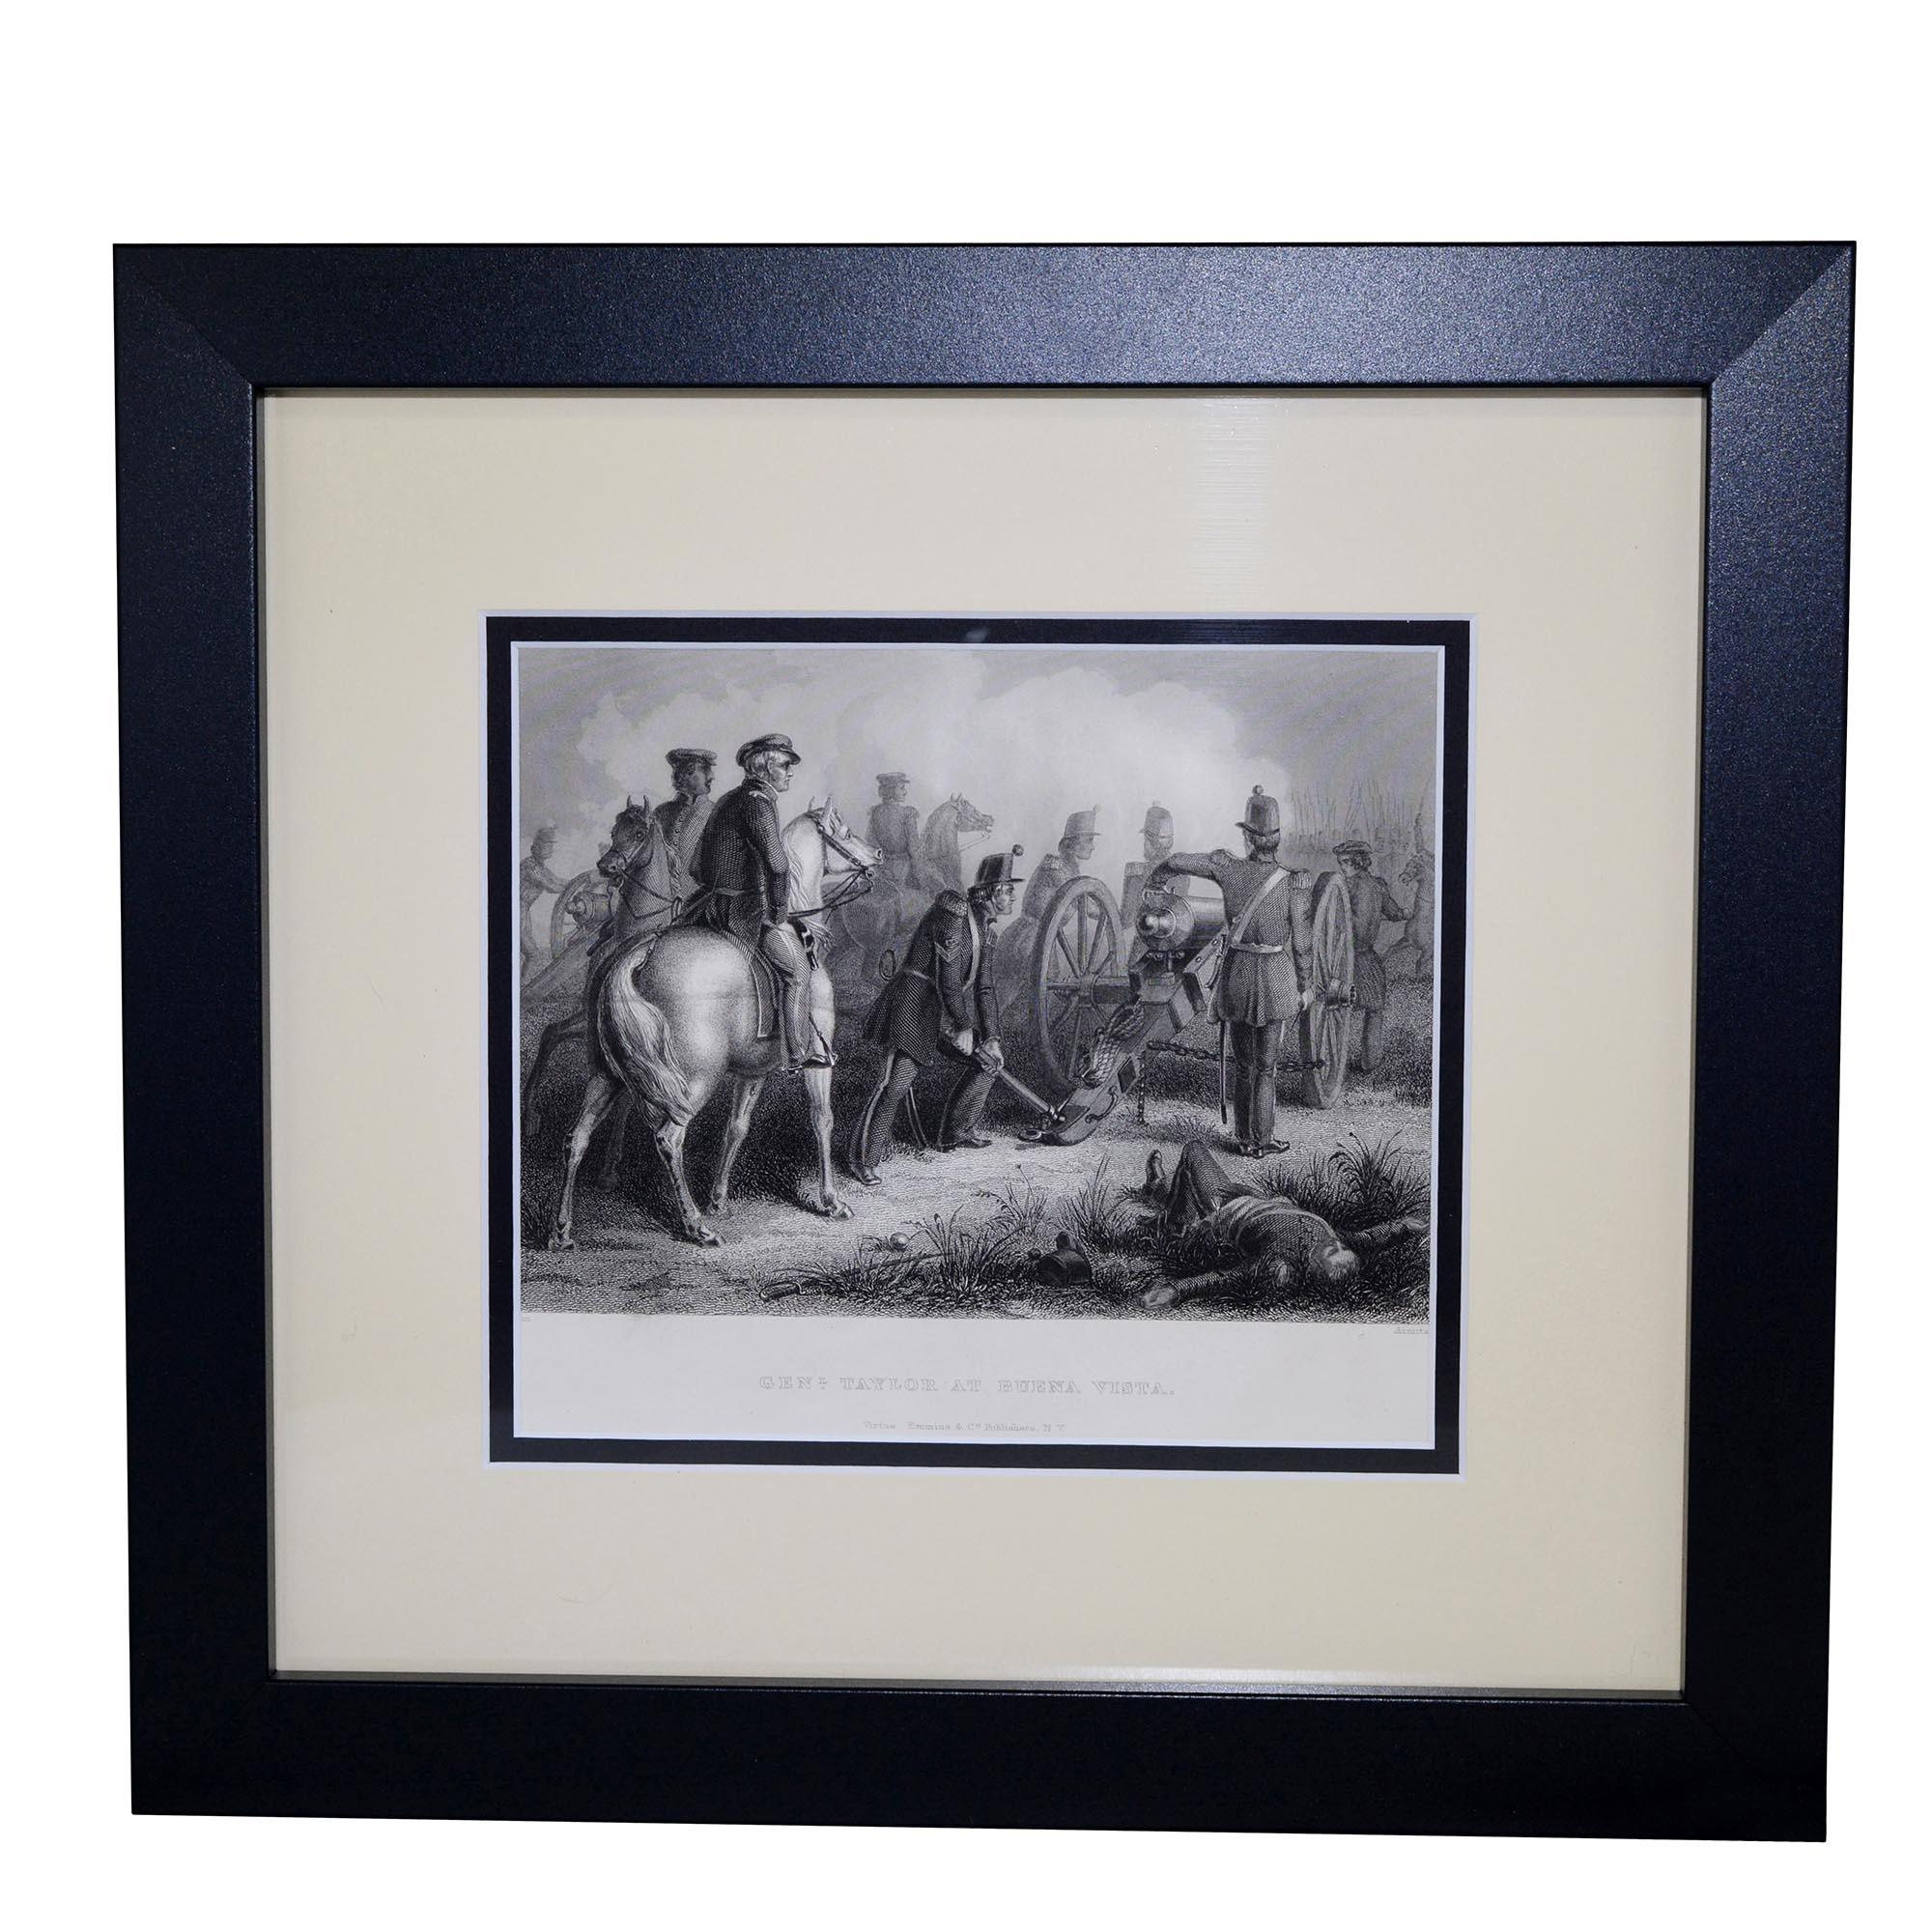 Set of three antique prints 
- Fall of Major Ringold
- Gen'l Taylor at Buena Vista
- Col Miller at the Battle of Chippewa
Prints independently measure: 11.75